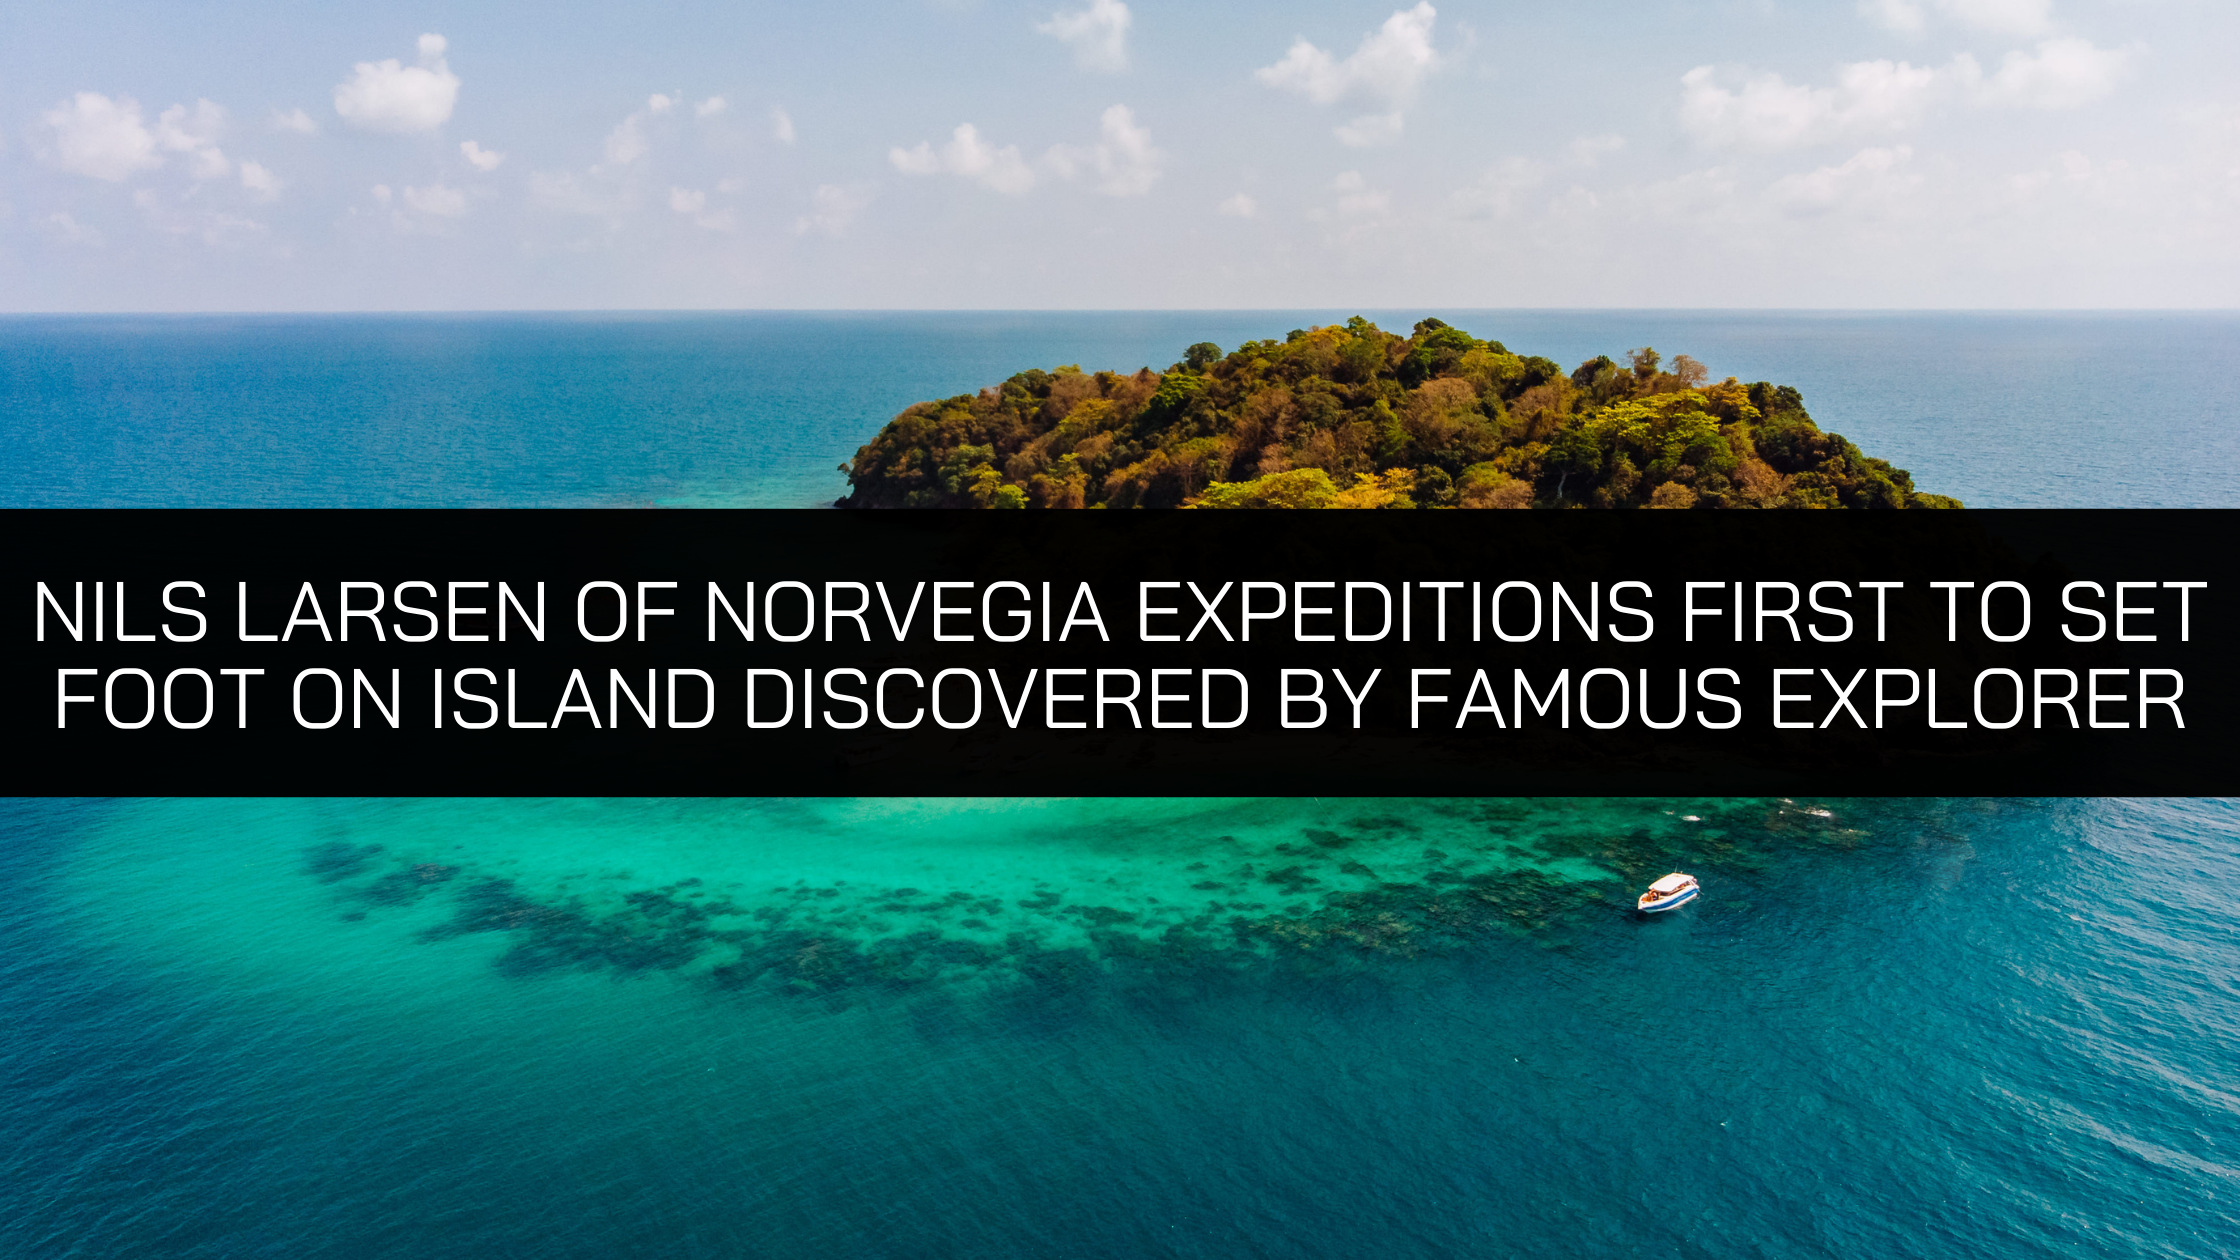 Nils Larsen of Norvegia Expeditions First to Set Foot on Island Discovered by Famous Explorer